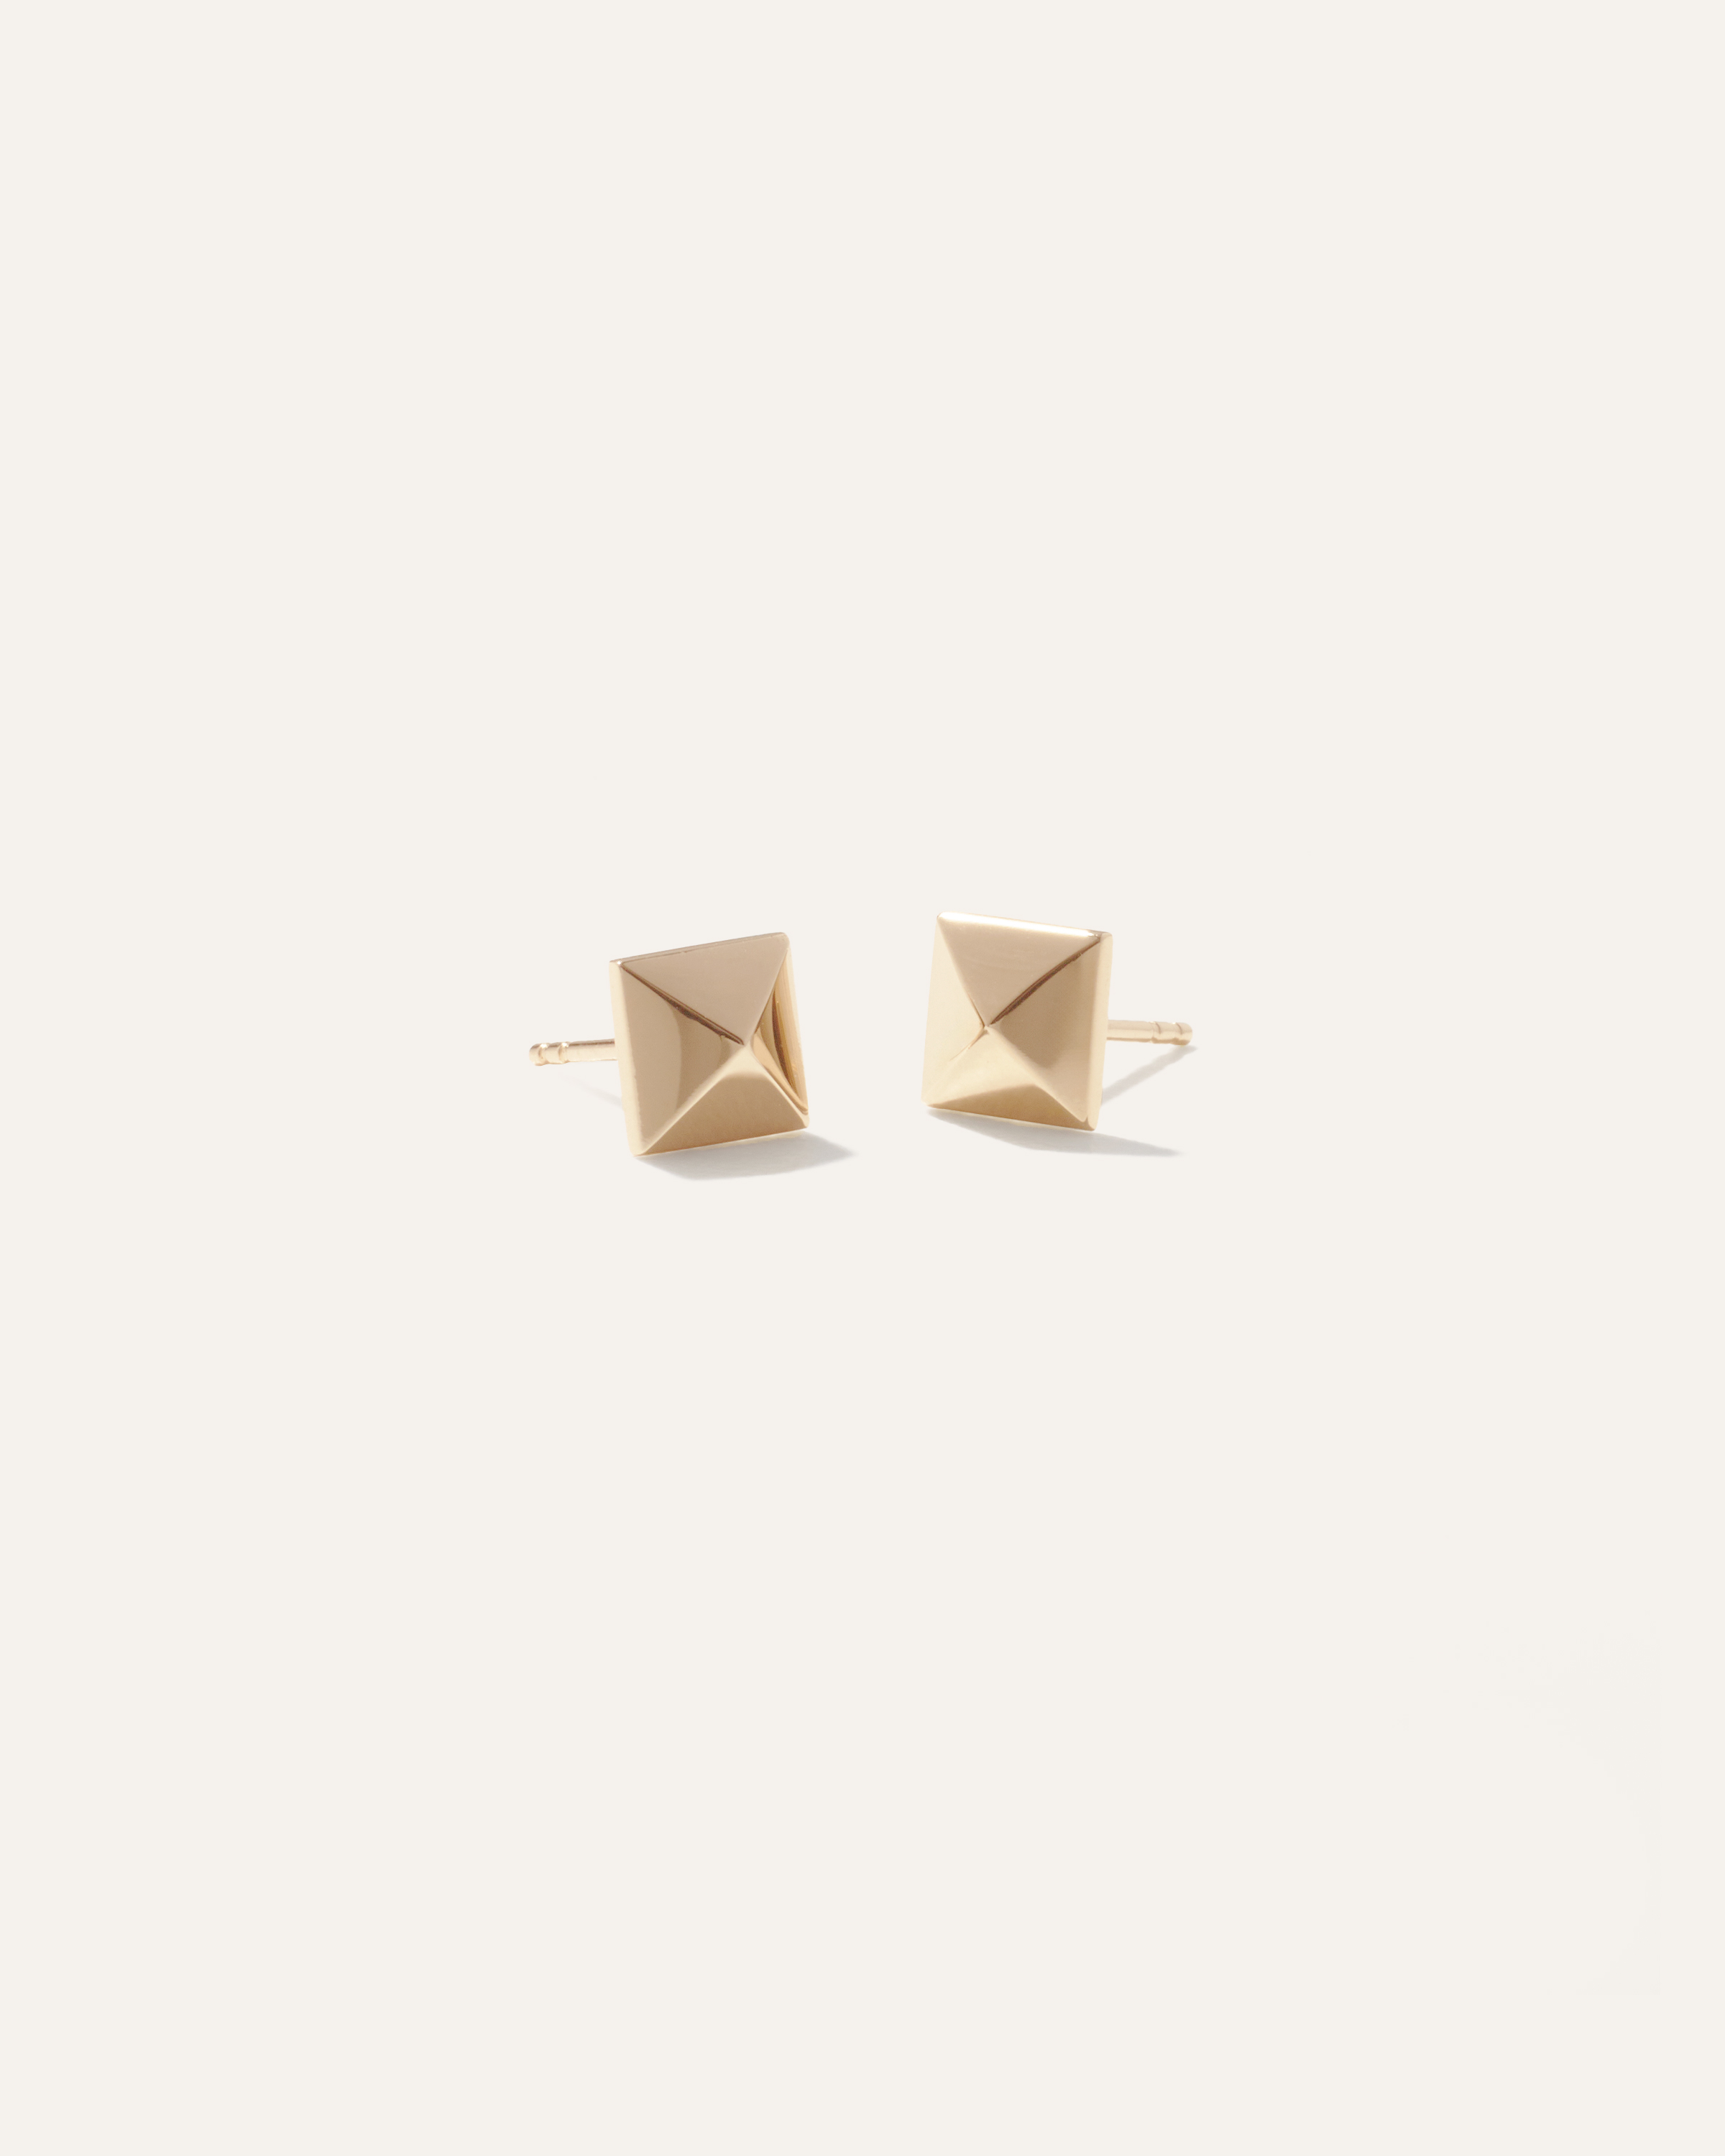 Quince Women's 14k Gold Pyramid Stud Earrings